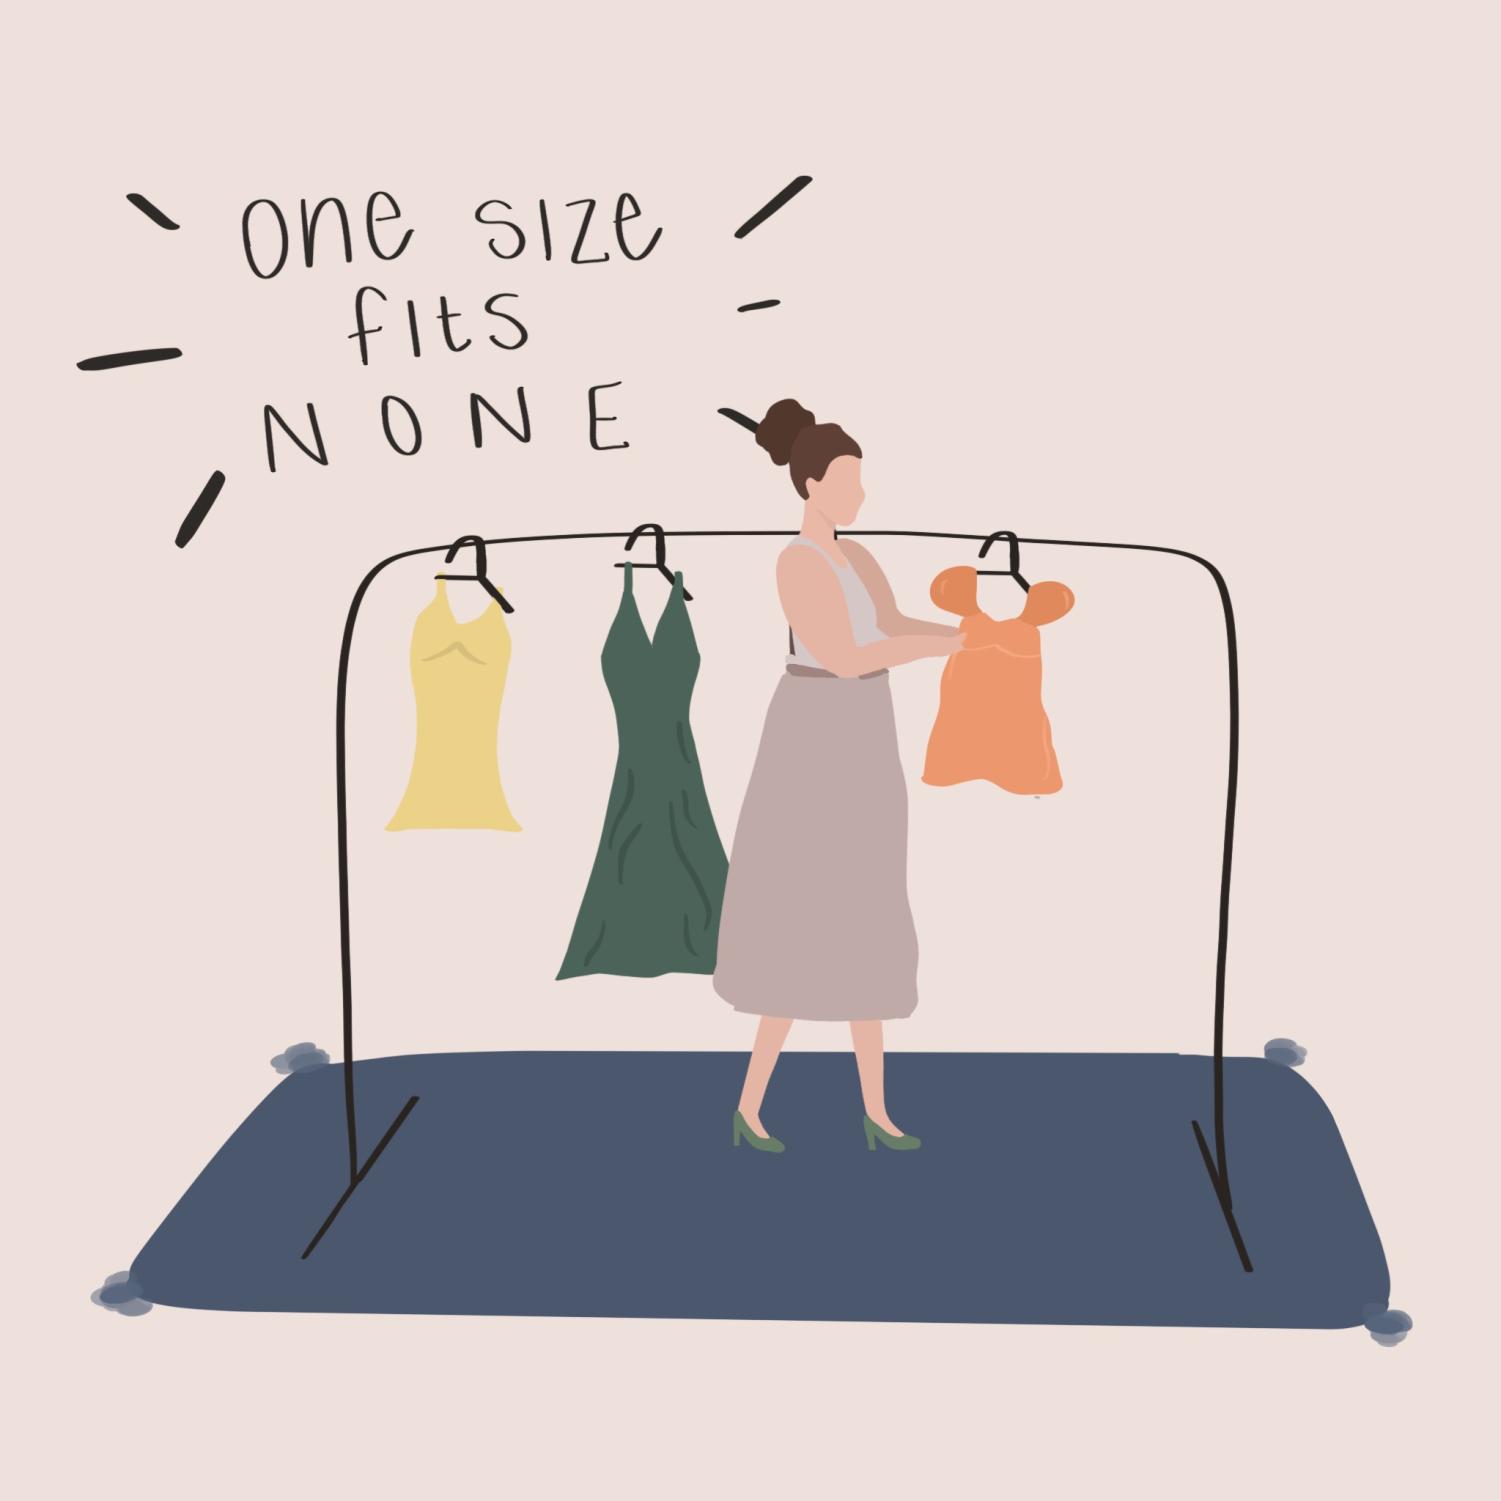 Brandy Melville: the issue of size equality